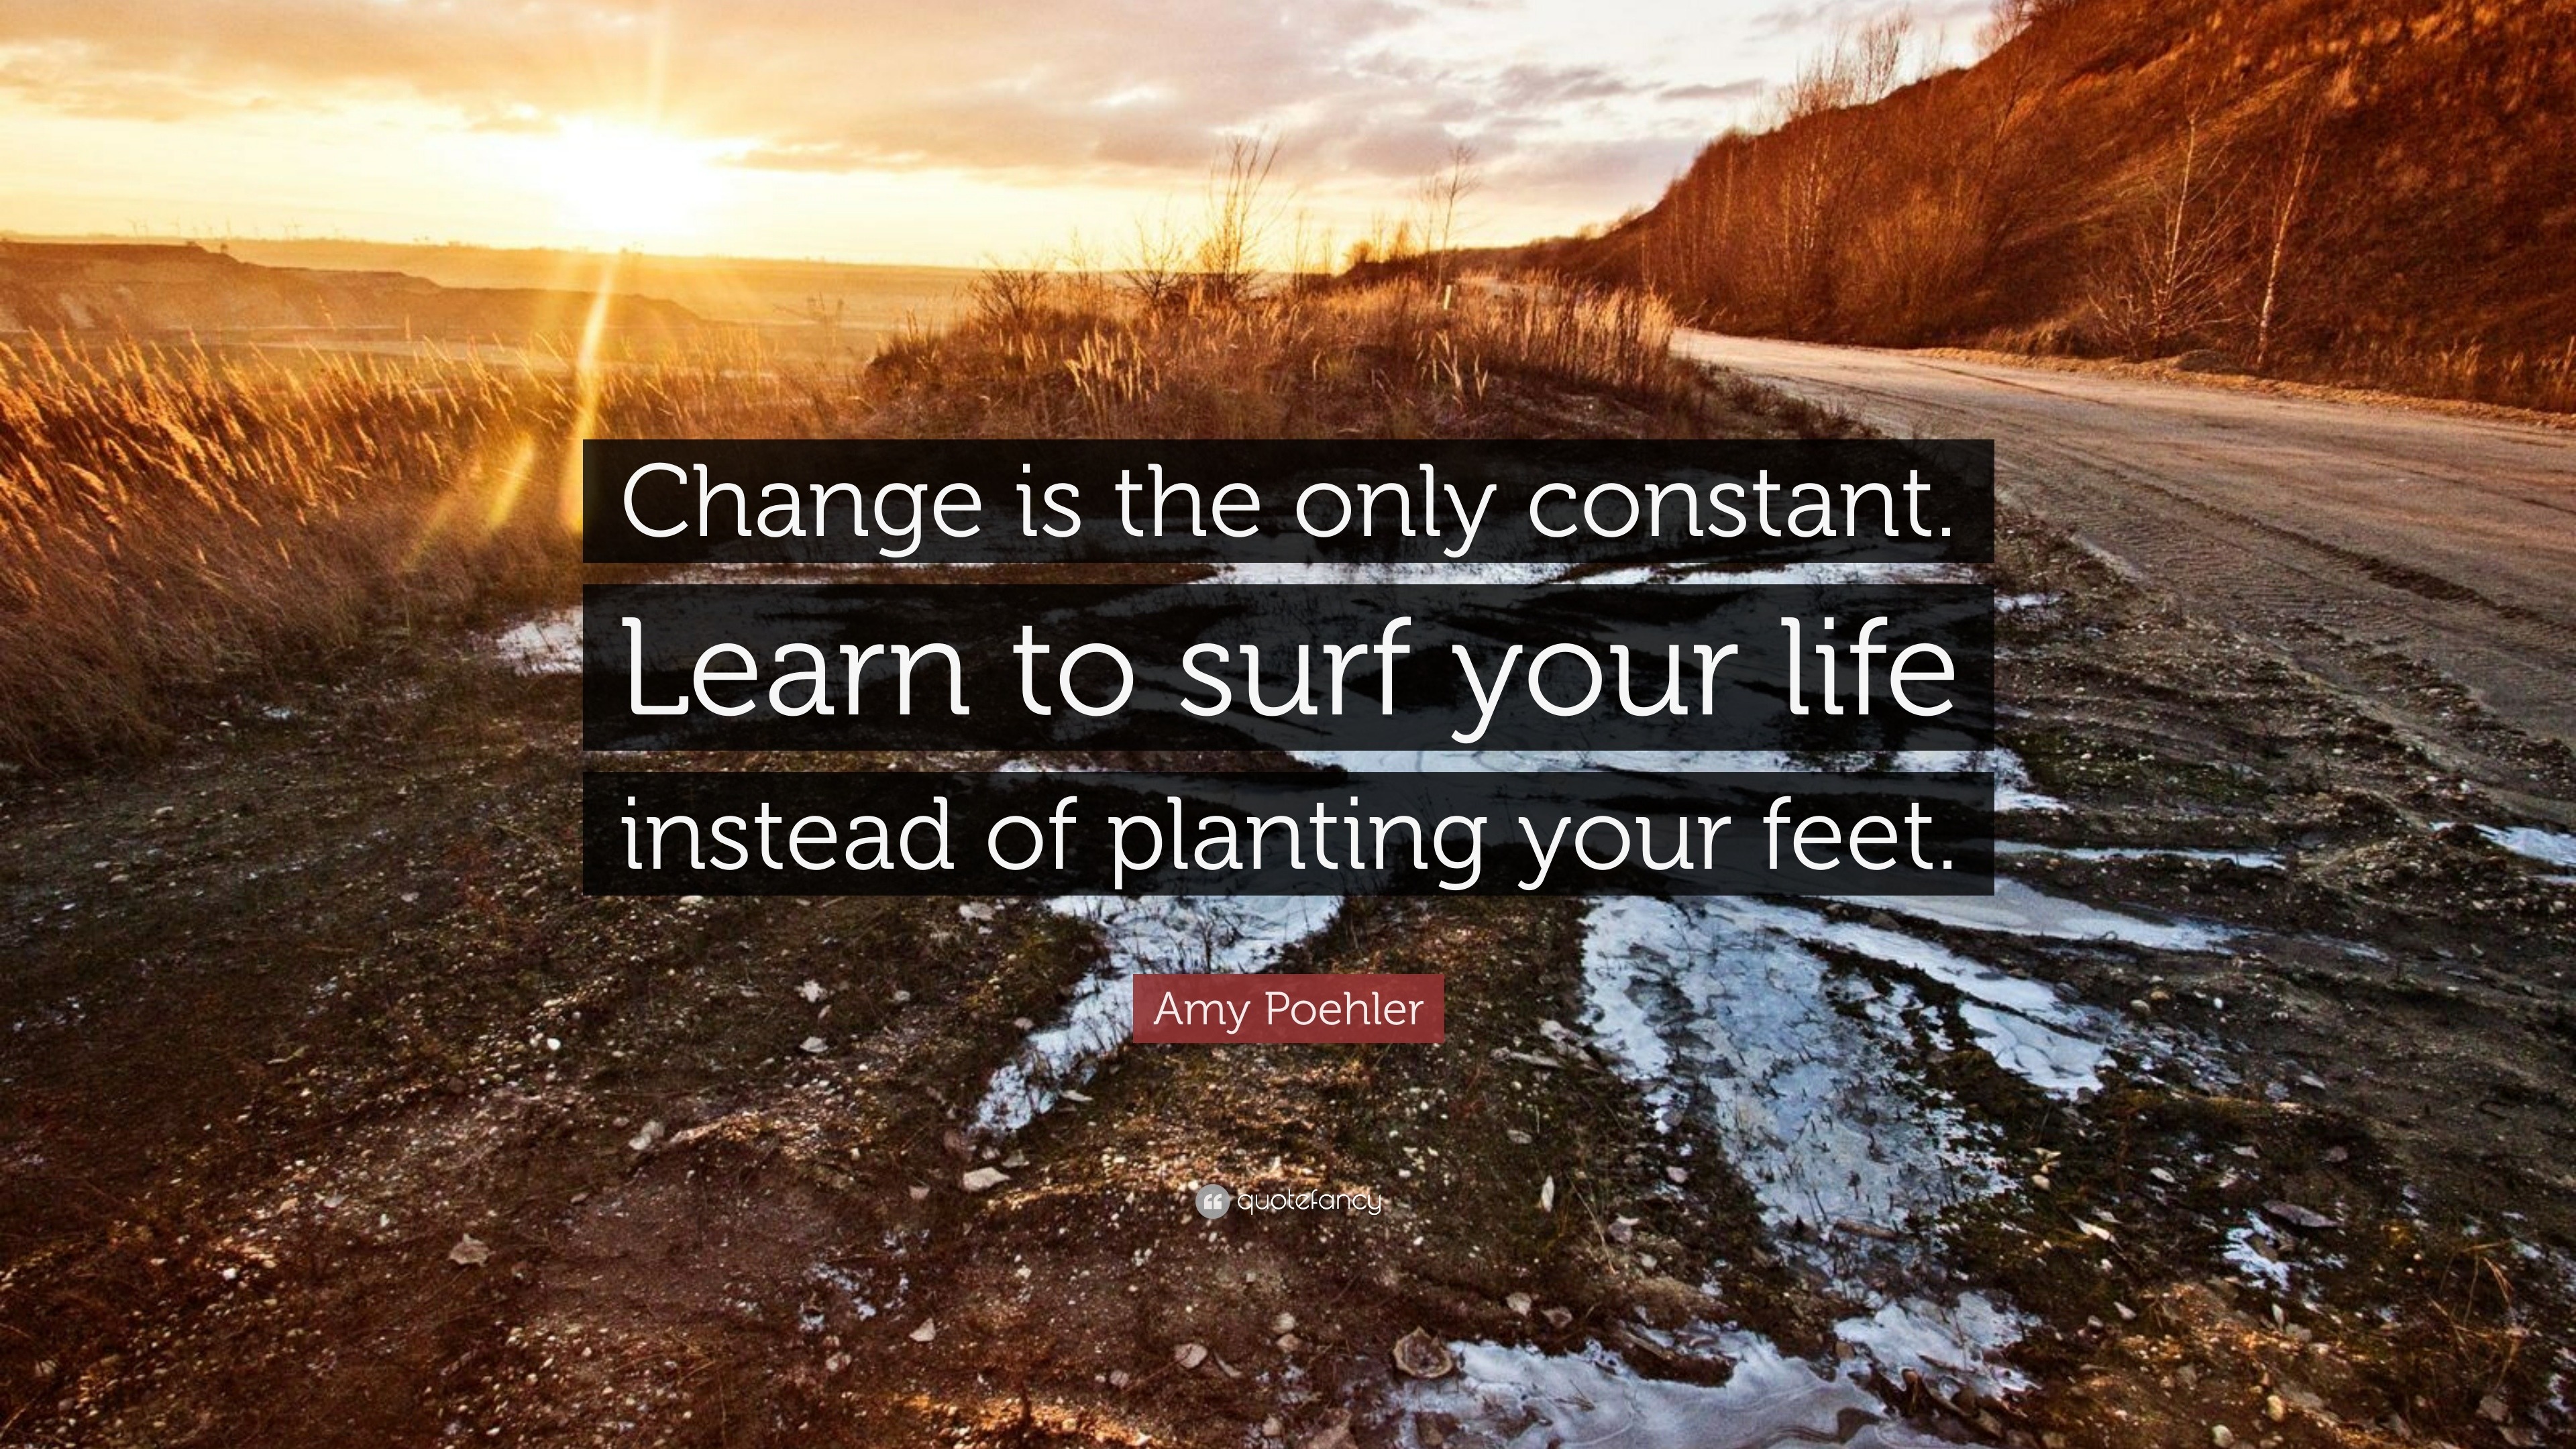 Amy Poehler Quote “Change is the only constant Learn to surf your life